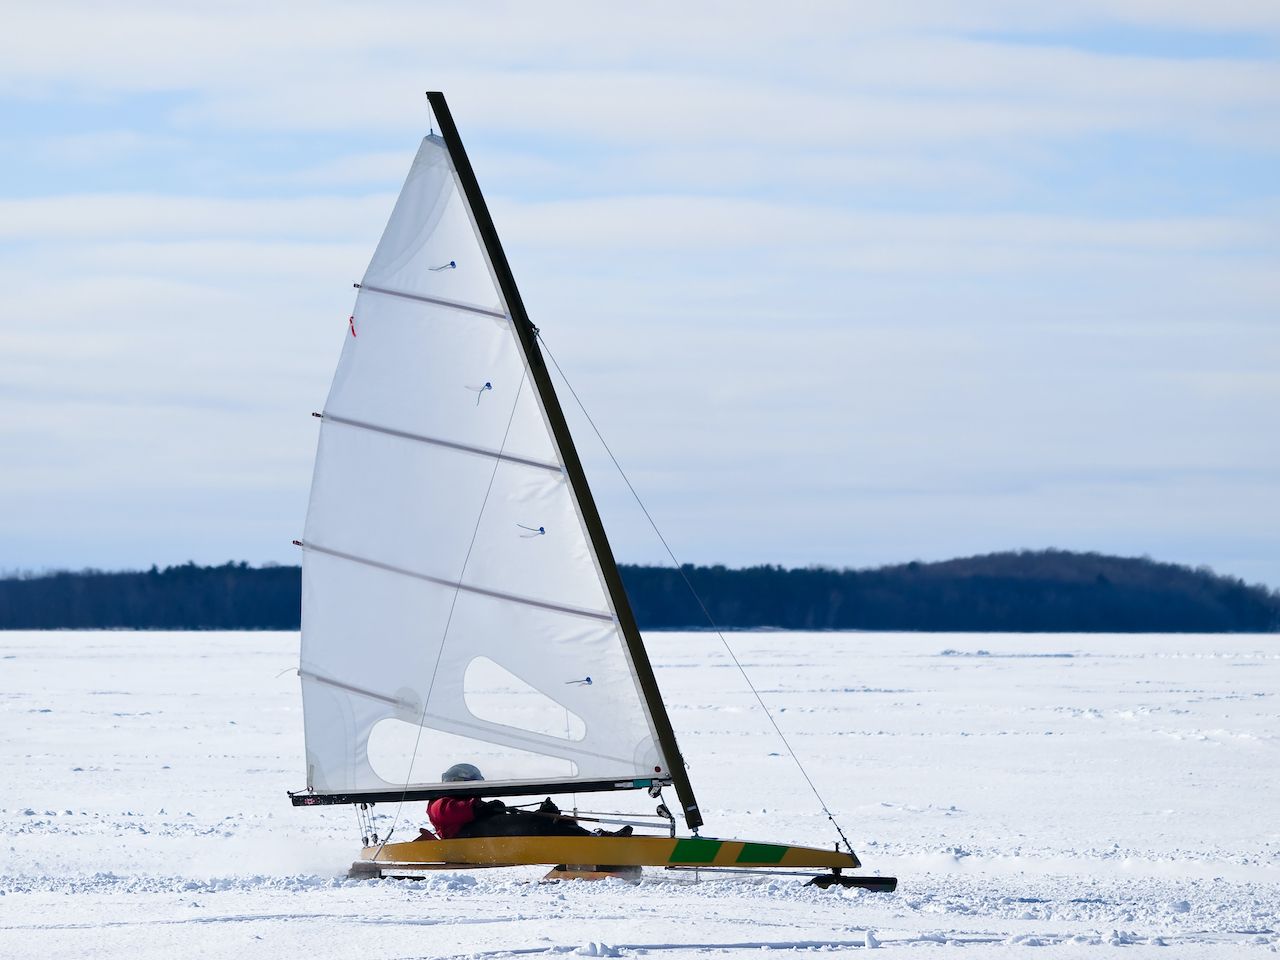 Ice sailing on the frozen lake